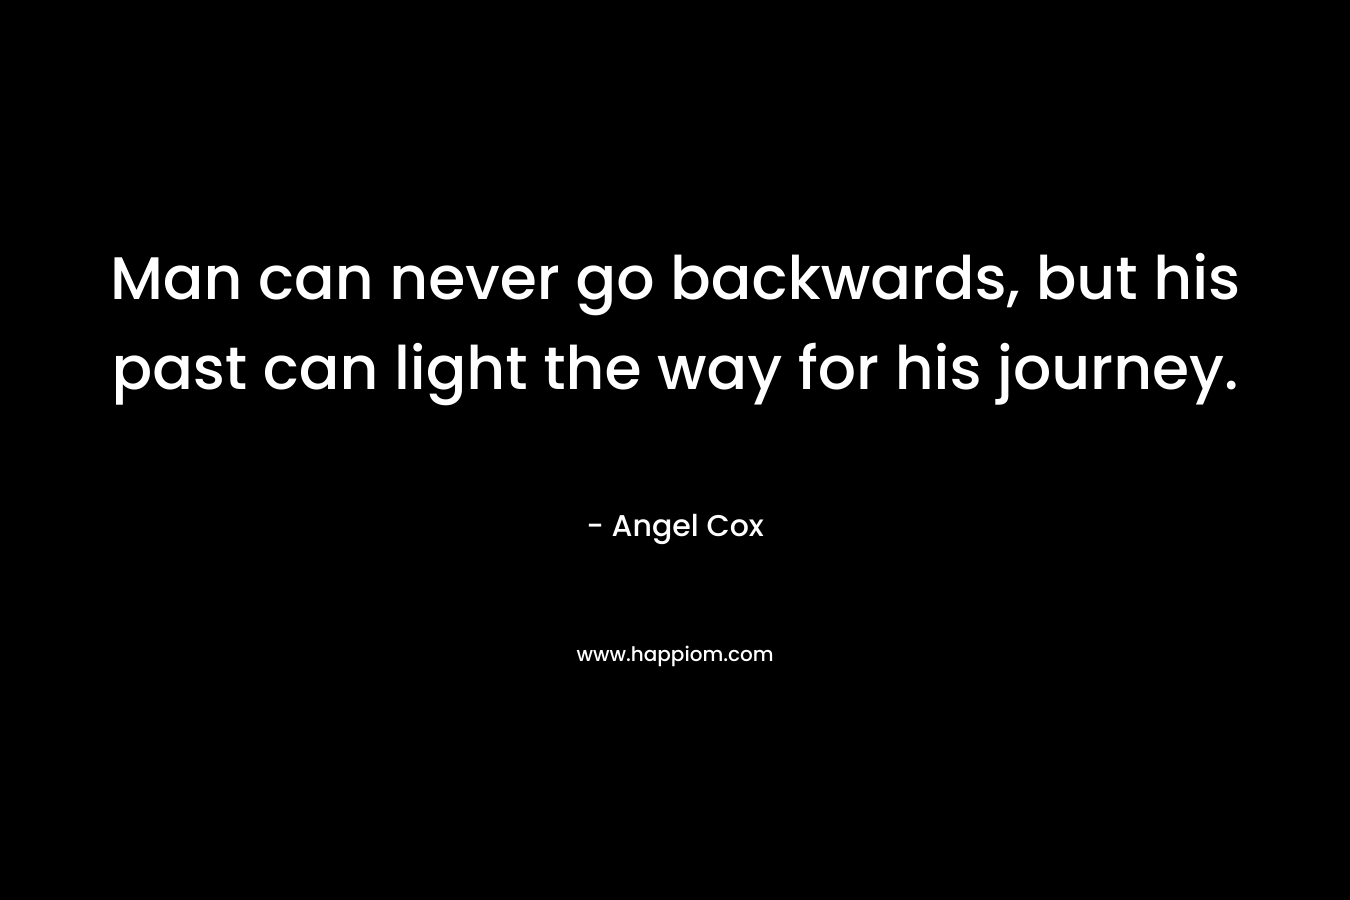 Man can never go backwards, but his past can light the way for his journey. – Angel Cox